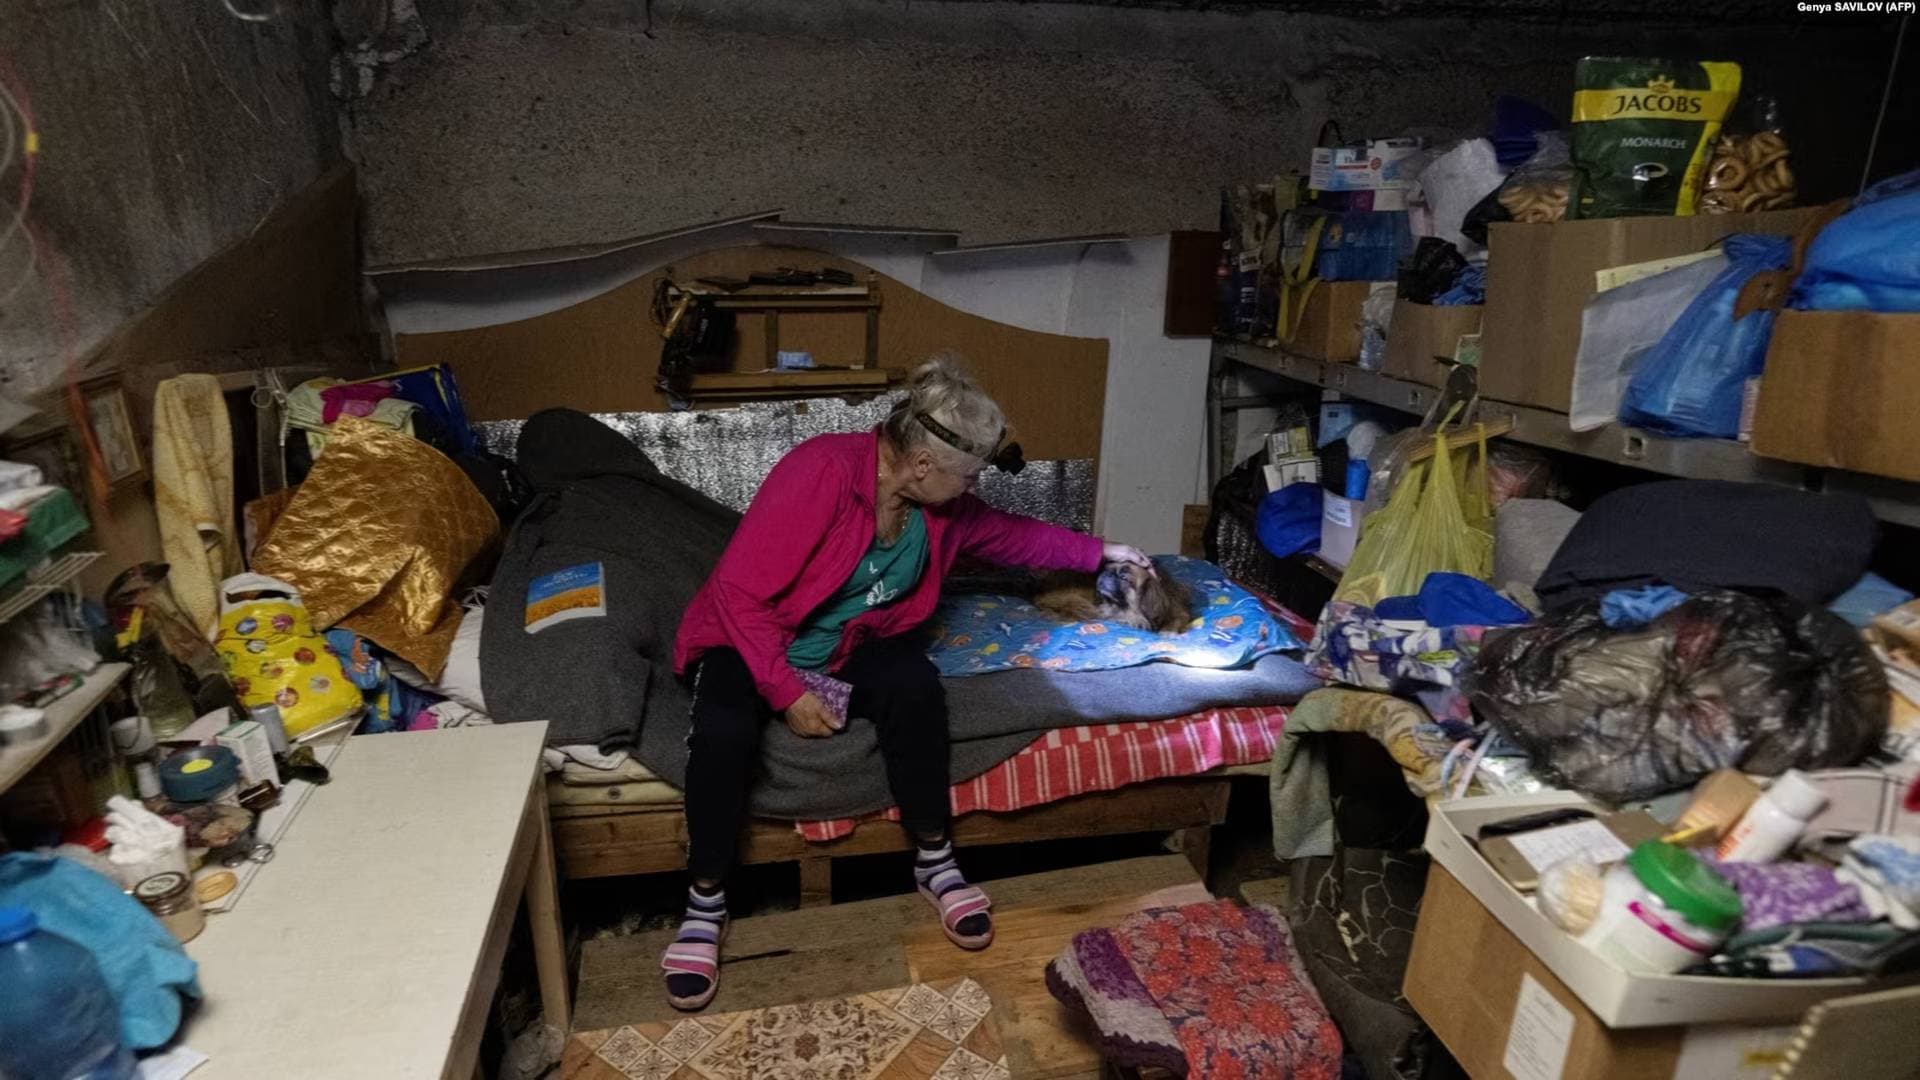 A woman pets a dog in the cold, dark cellar where she lives